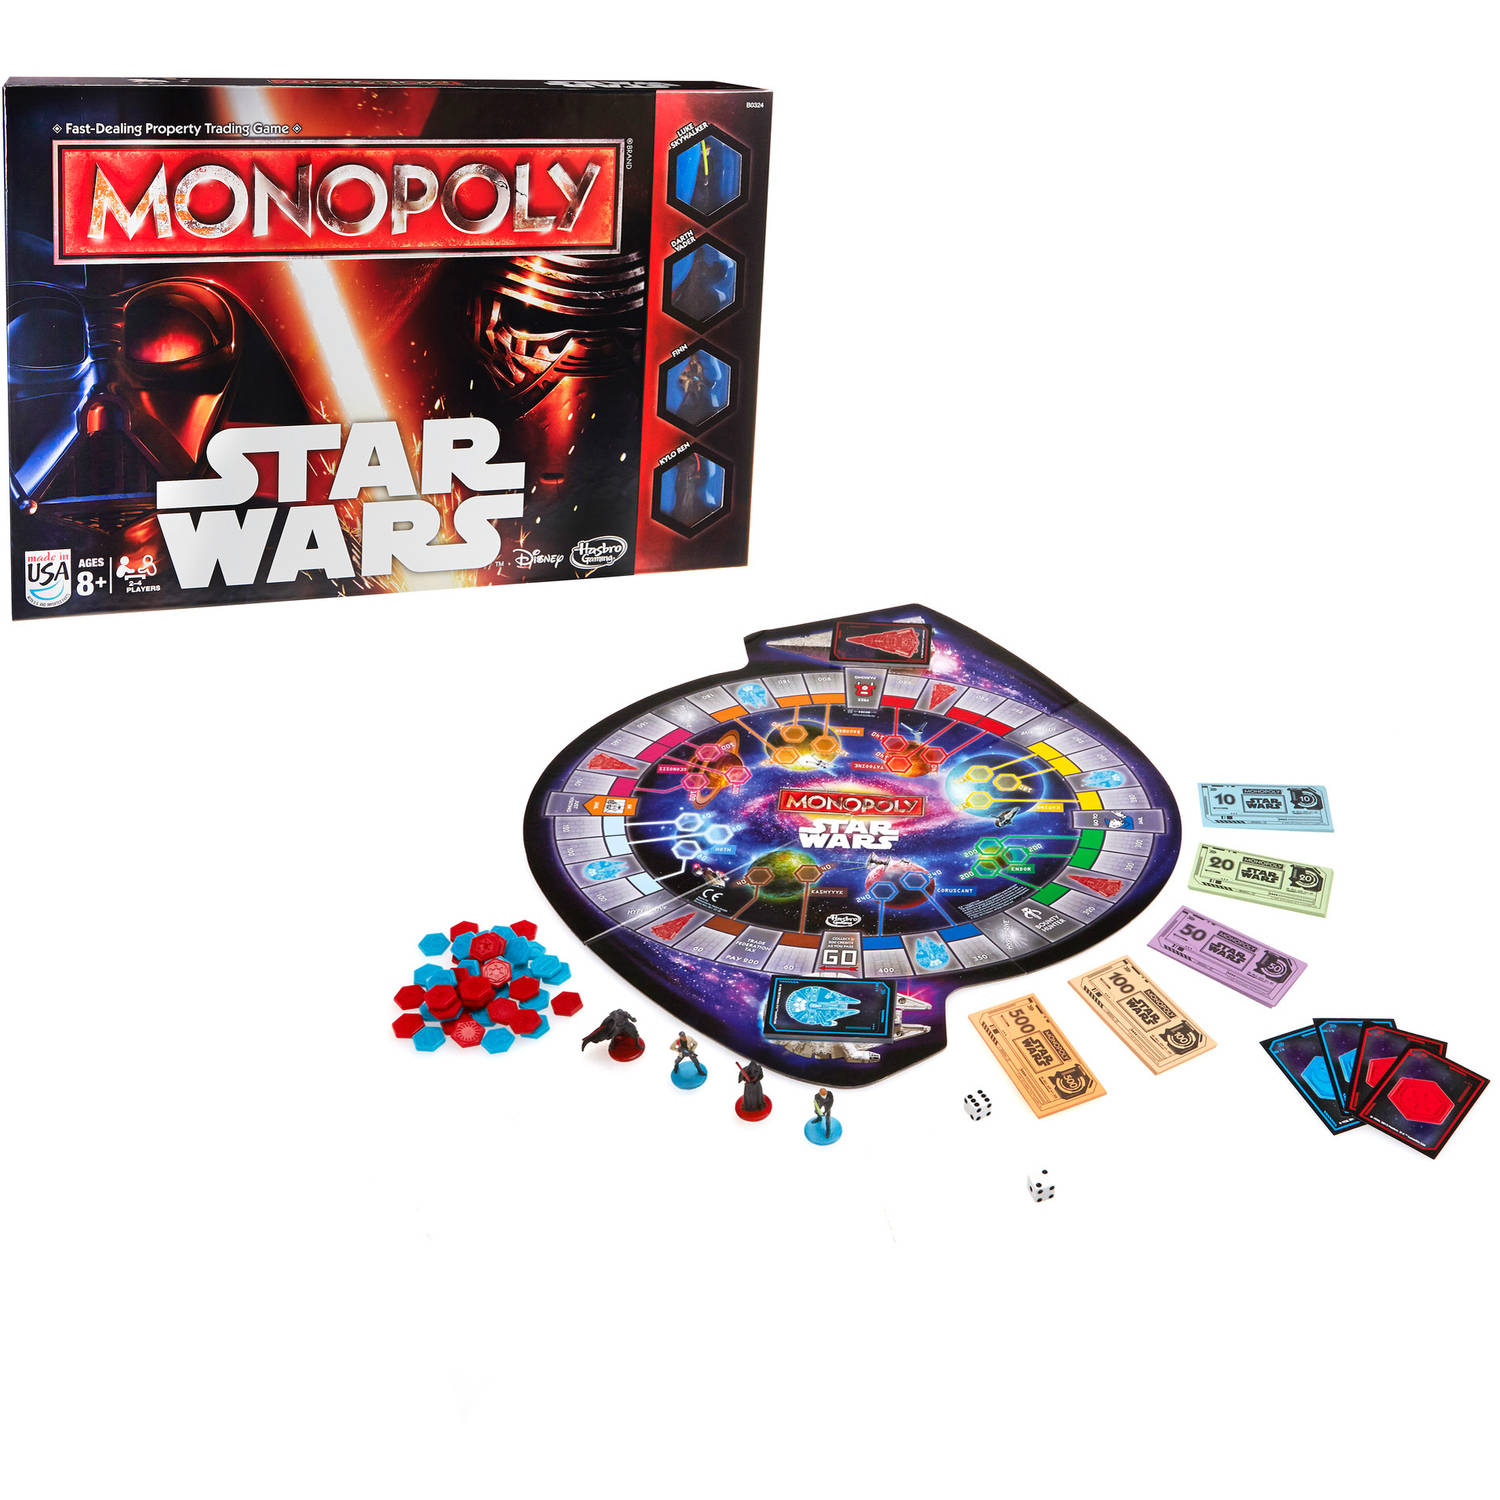 Monopoly Game Star Wars - image 2 of 17